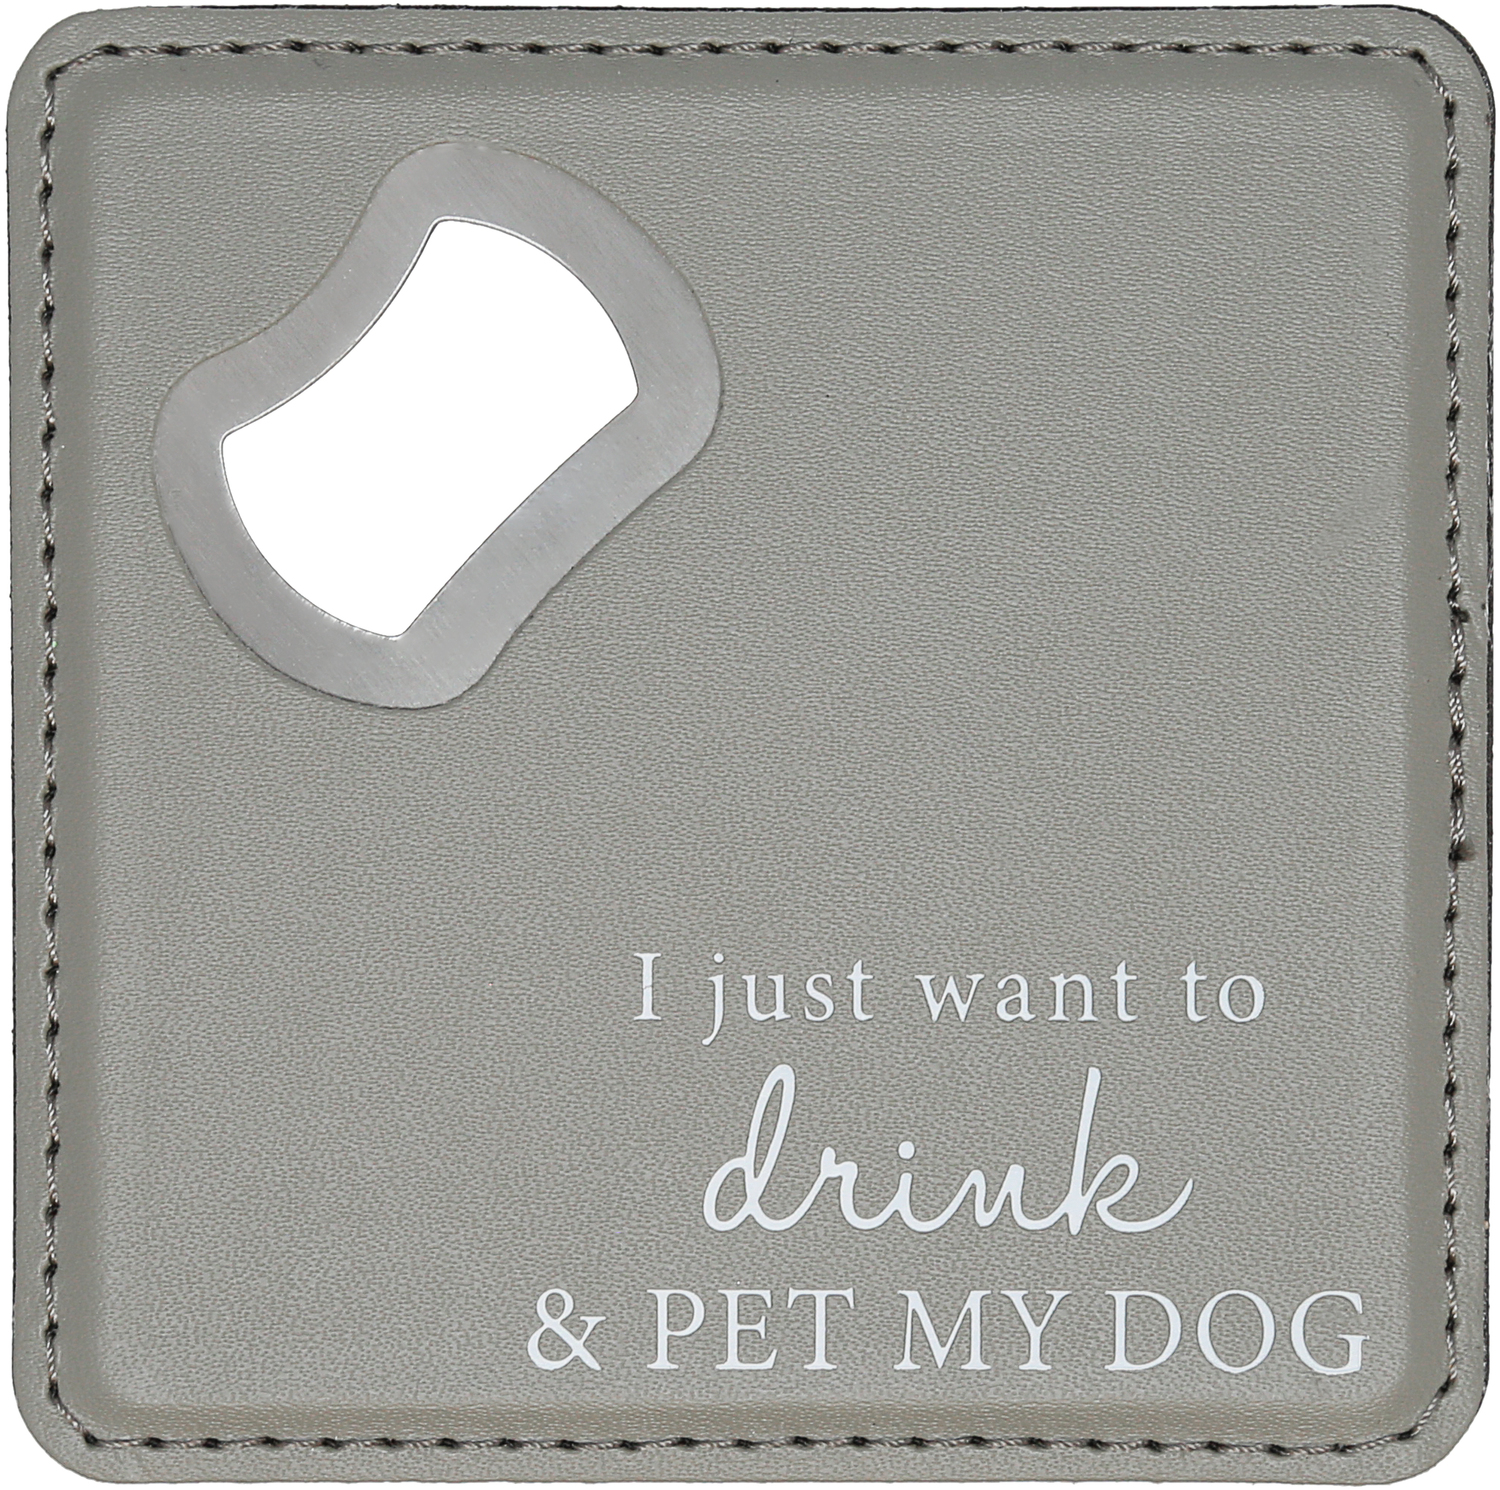 Pet My Dog by A-Parent-ly - Pet My Dog - 4" x 4" Bottle Opener Coaster